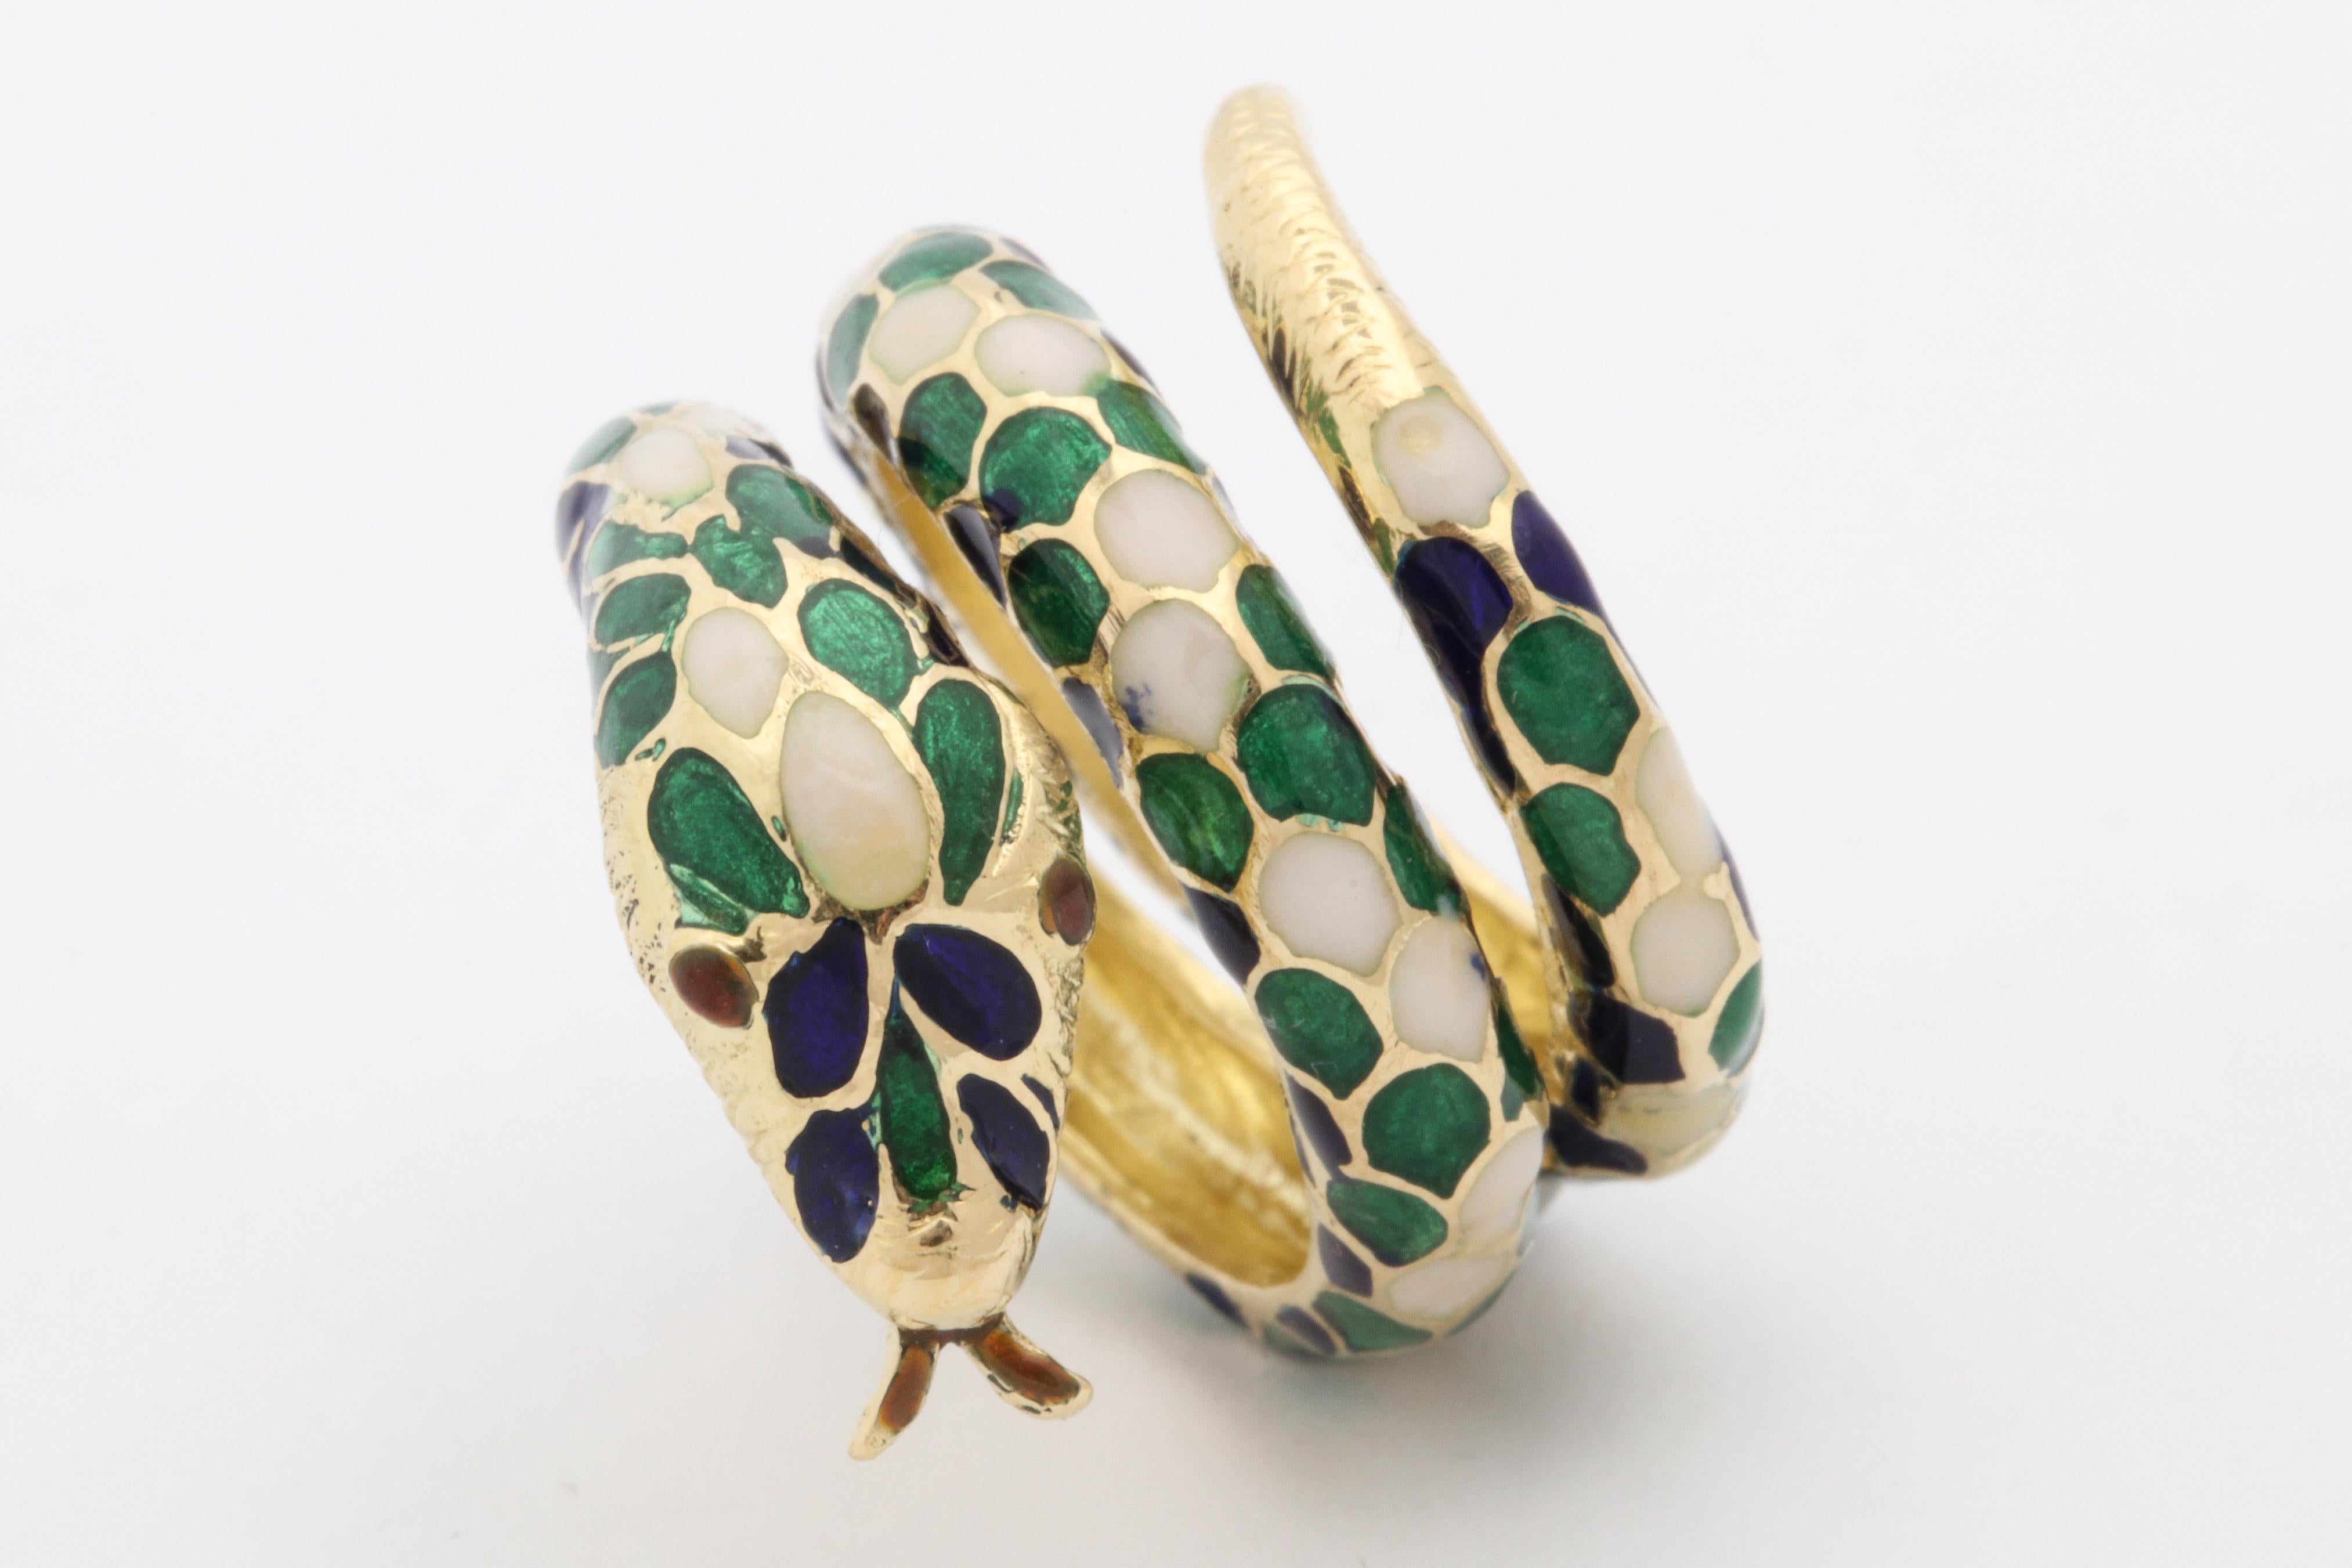 One Ladies Cocktail Ring Designed With Blue,Green And White Hard Enamel Pattern In A Shape Of A Snake. Beautiful Wrap Around Coil Effect To Emulate A Snakes Full Body. Created In 18kt Yellow Gold Ring Fits Size 7 - 7.5 Ring Size.Made In The 1960's